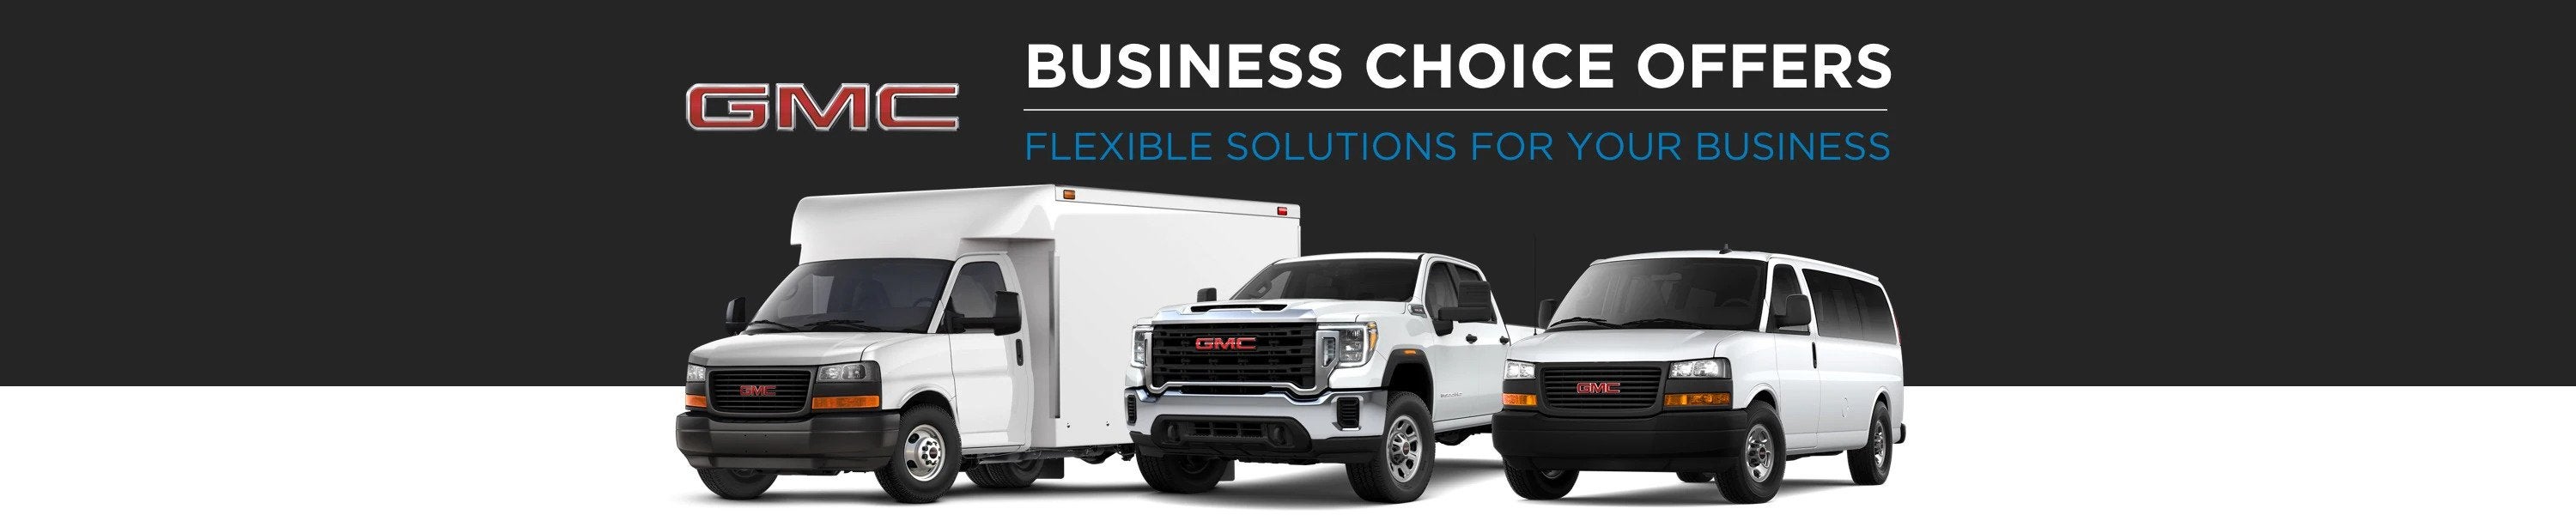 GMC Business Choice Offers - Flexible Solutions for your Business - Andy Mohr Chevrolet in Plainfield IN